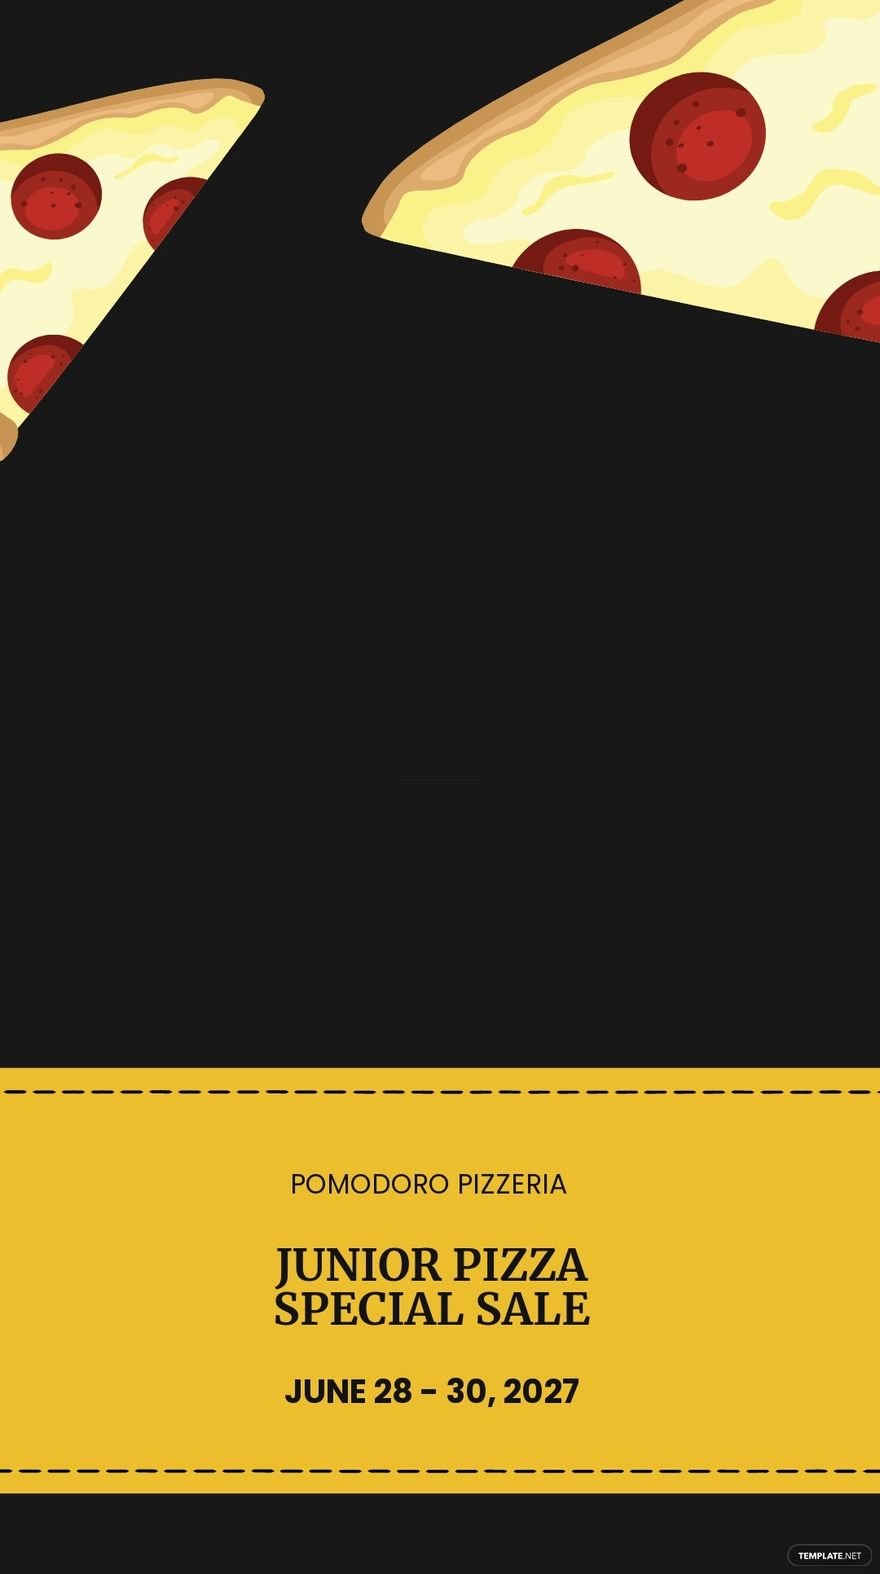 Pizza Special Sale Snapchat Geofilter Template.jpe